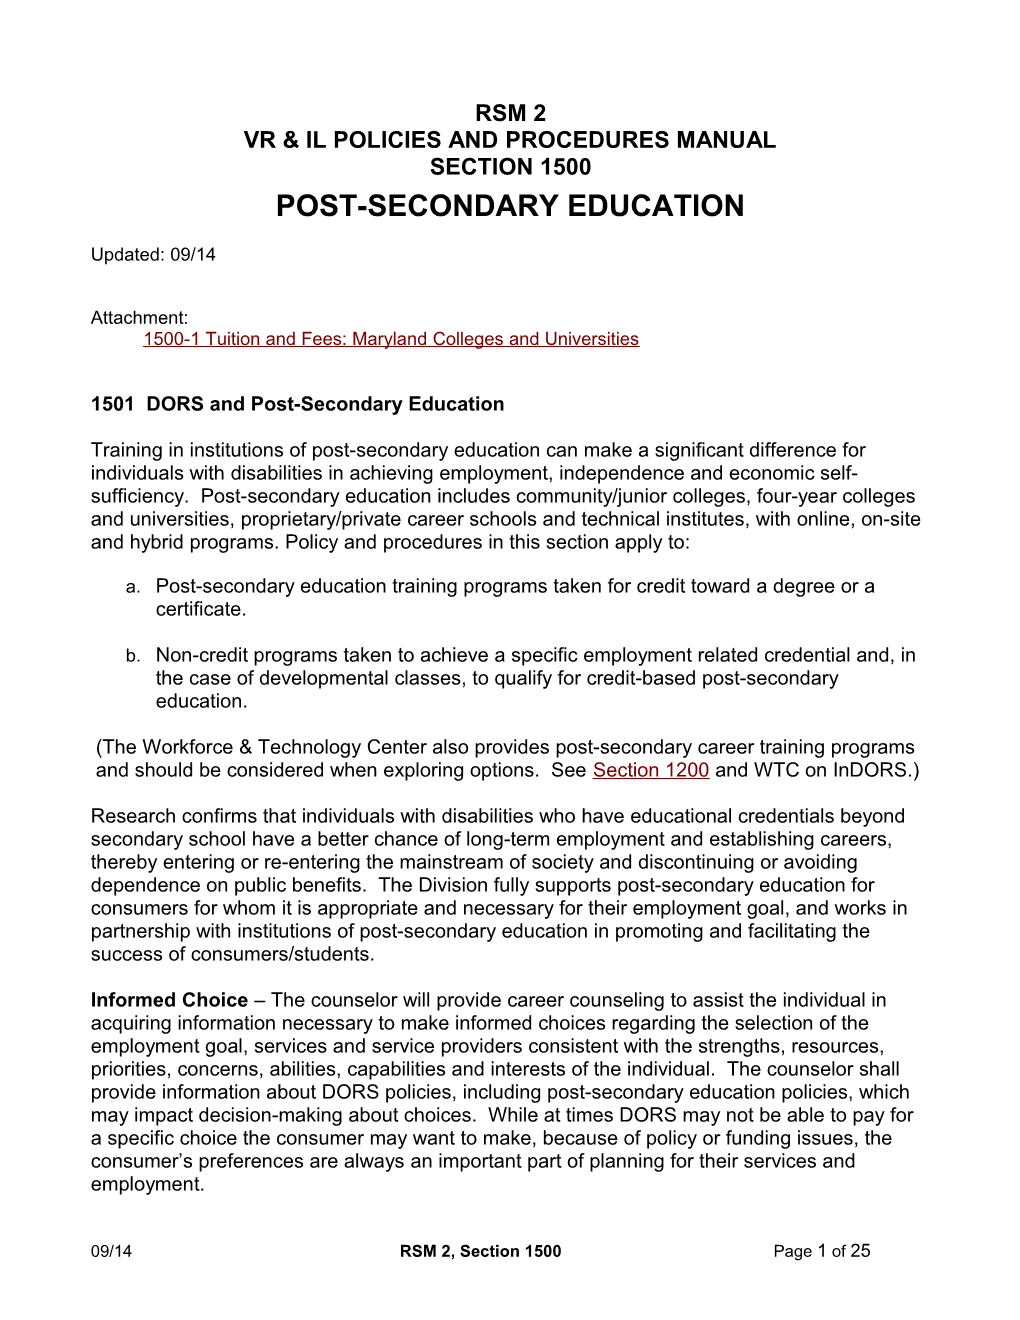 RSM 2, Section 1500: Post-Secondary Education